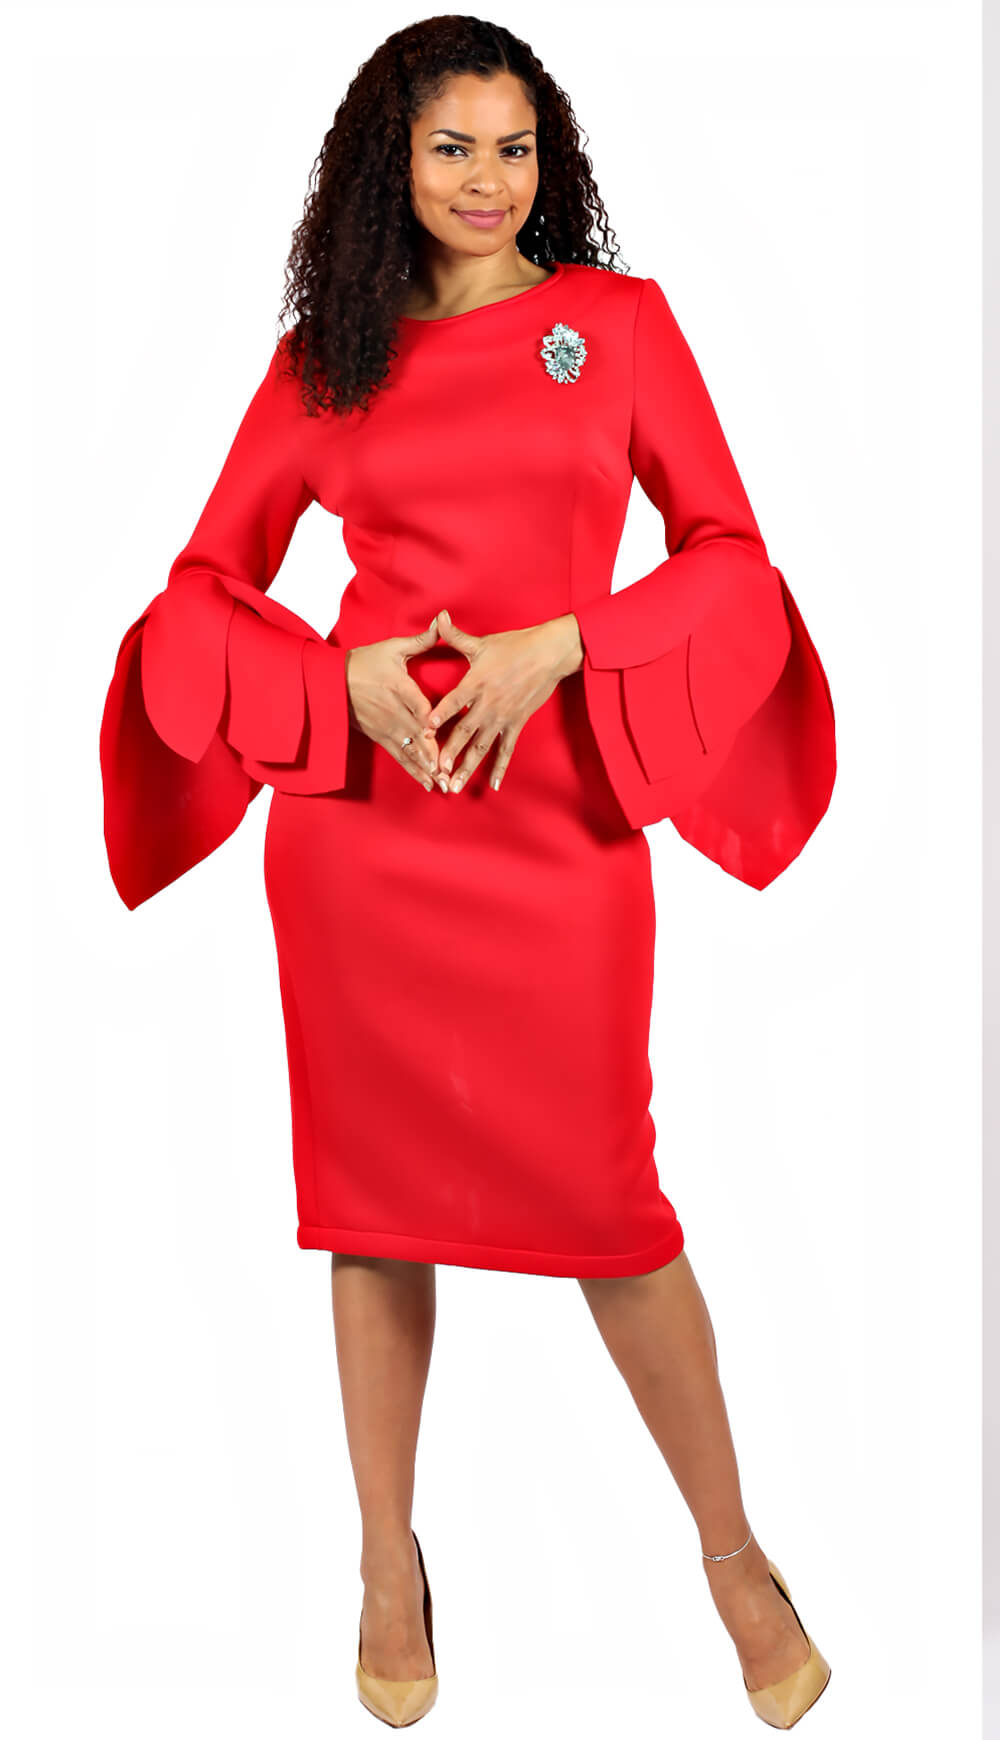 Diana Couture Church Dress 8668-Red | Church suits for less